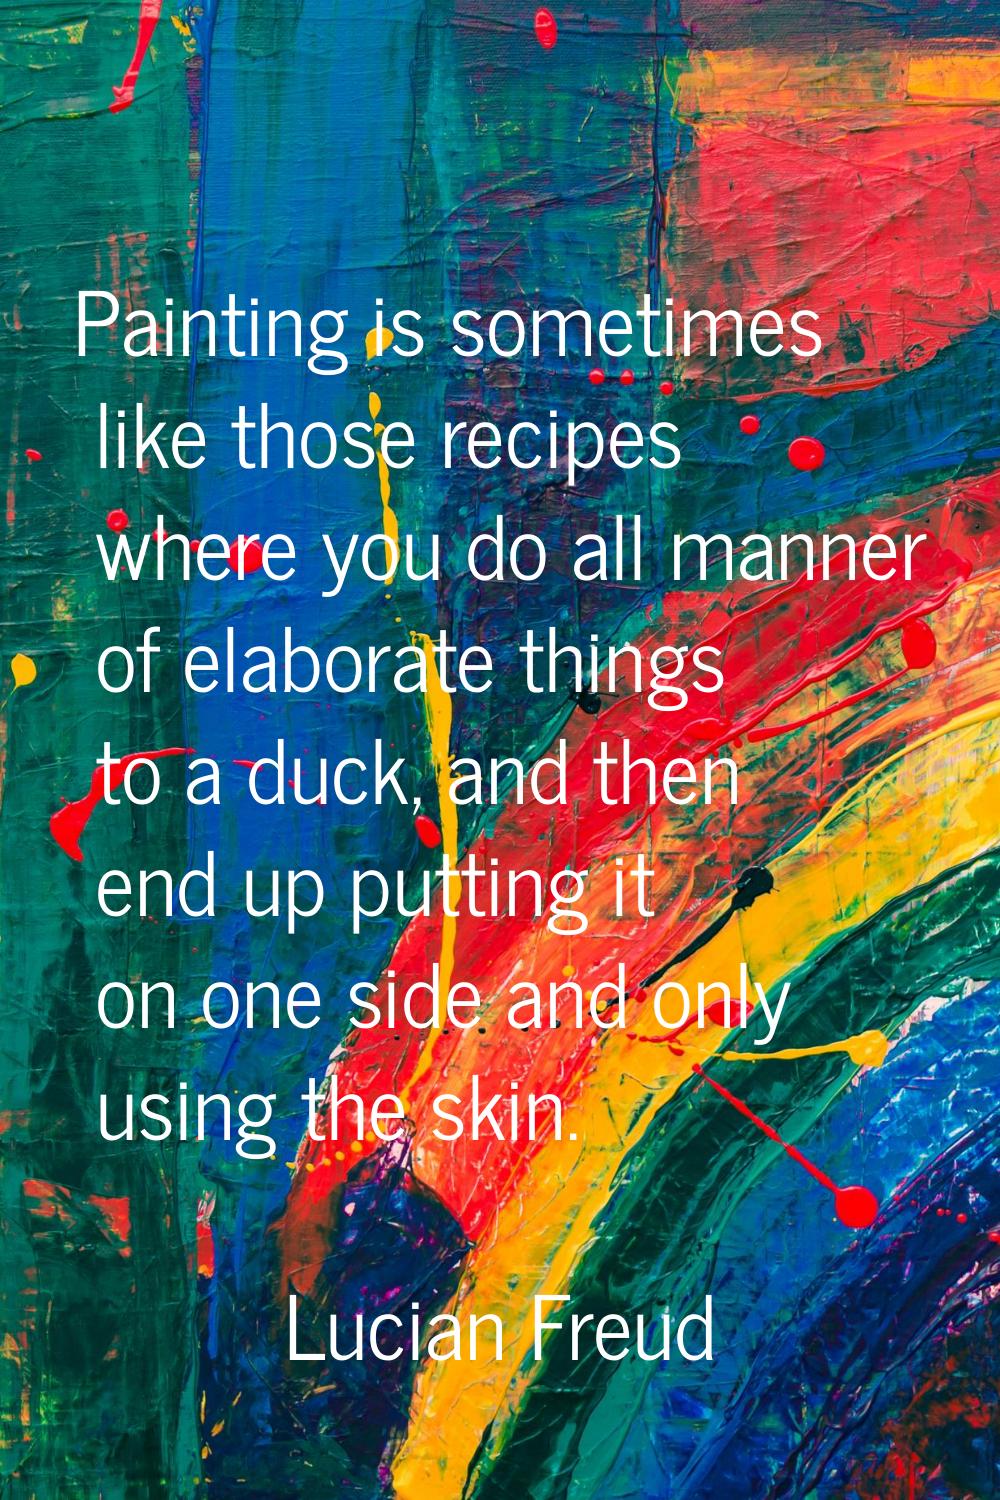 Painting is sometimes like those recipes where you do all manner of elaborate things to a duck, and